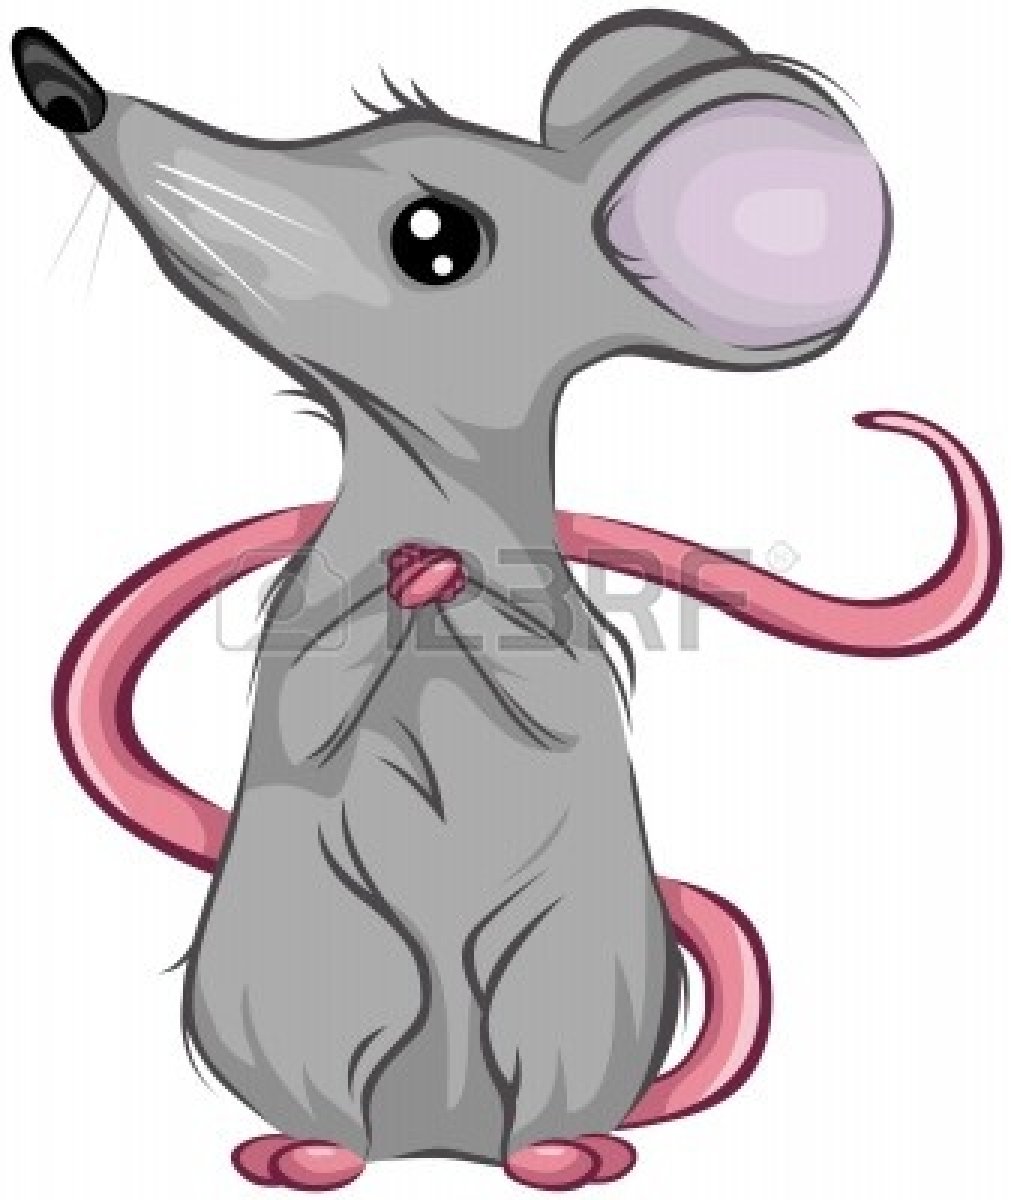 An Addict and a Mouse | Ramblings of a Recovering Alcoholic